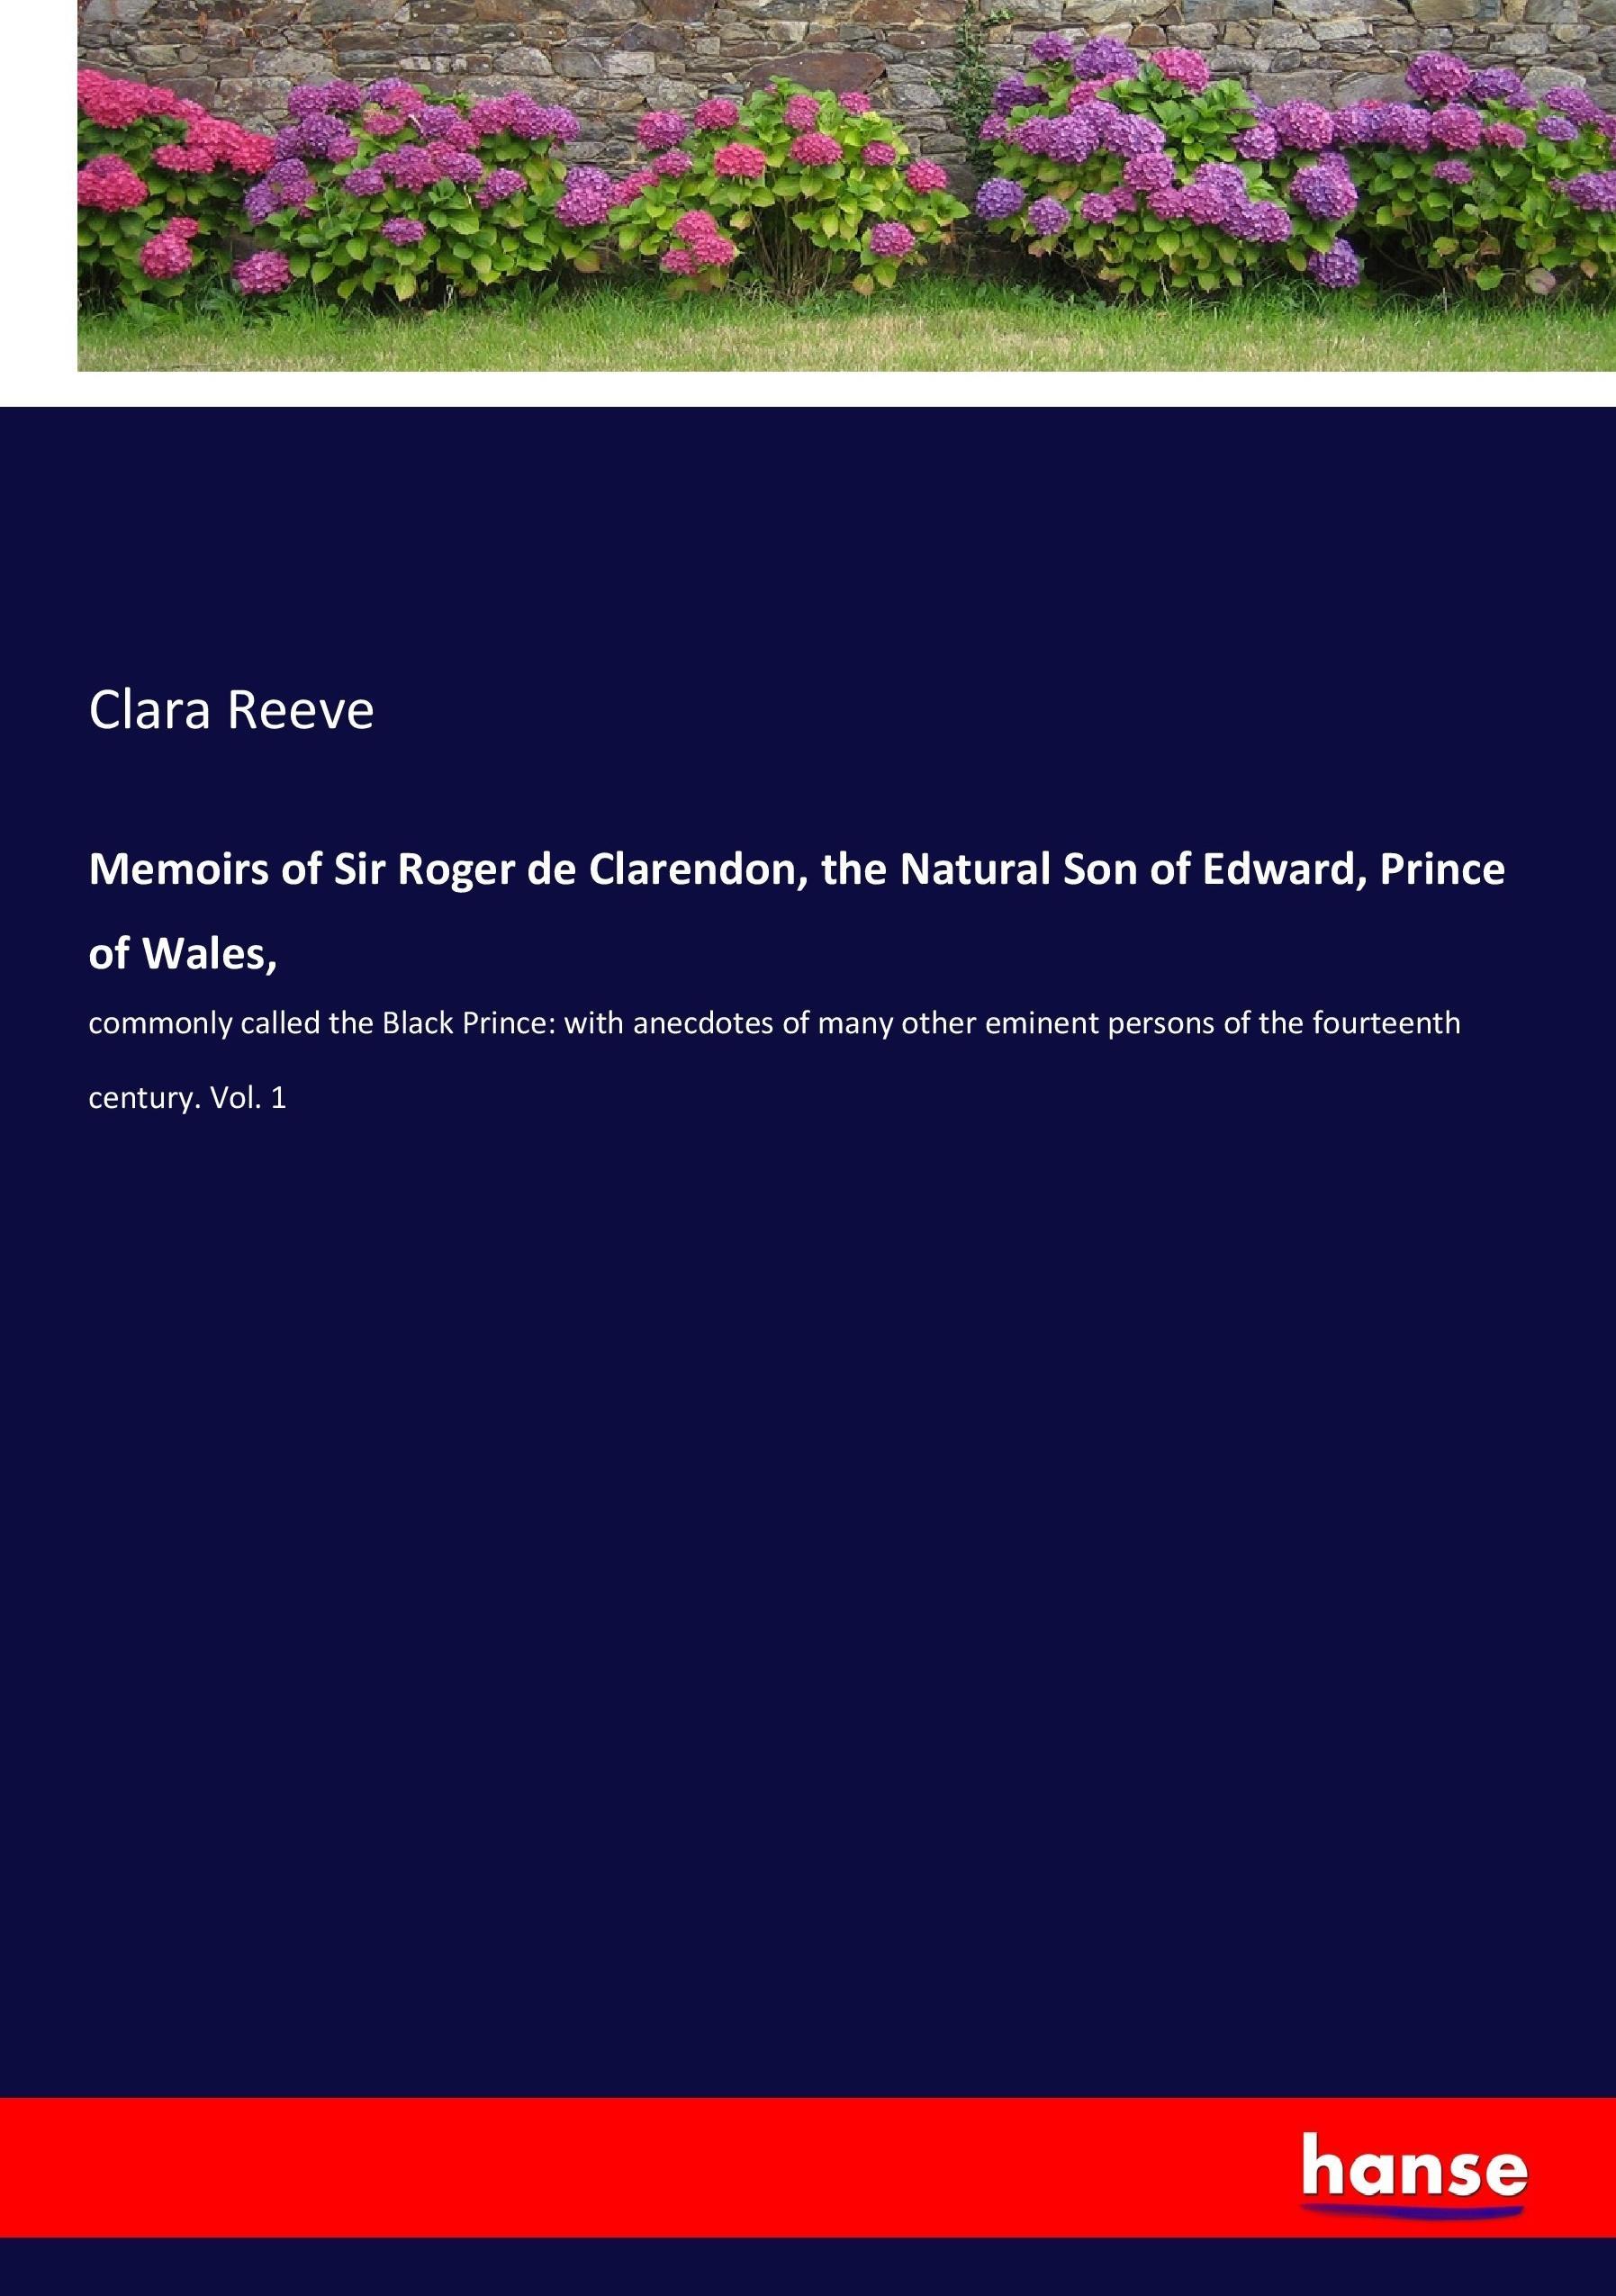 Memoirs of Sir Roger de Clarendon, the Natural Son of Edward, Prince of Wales - Reeve, Clara